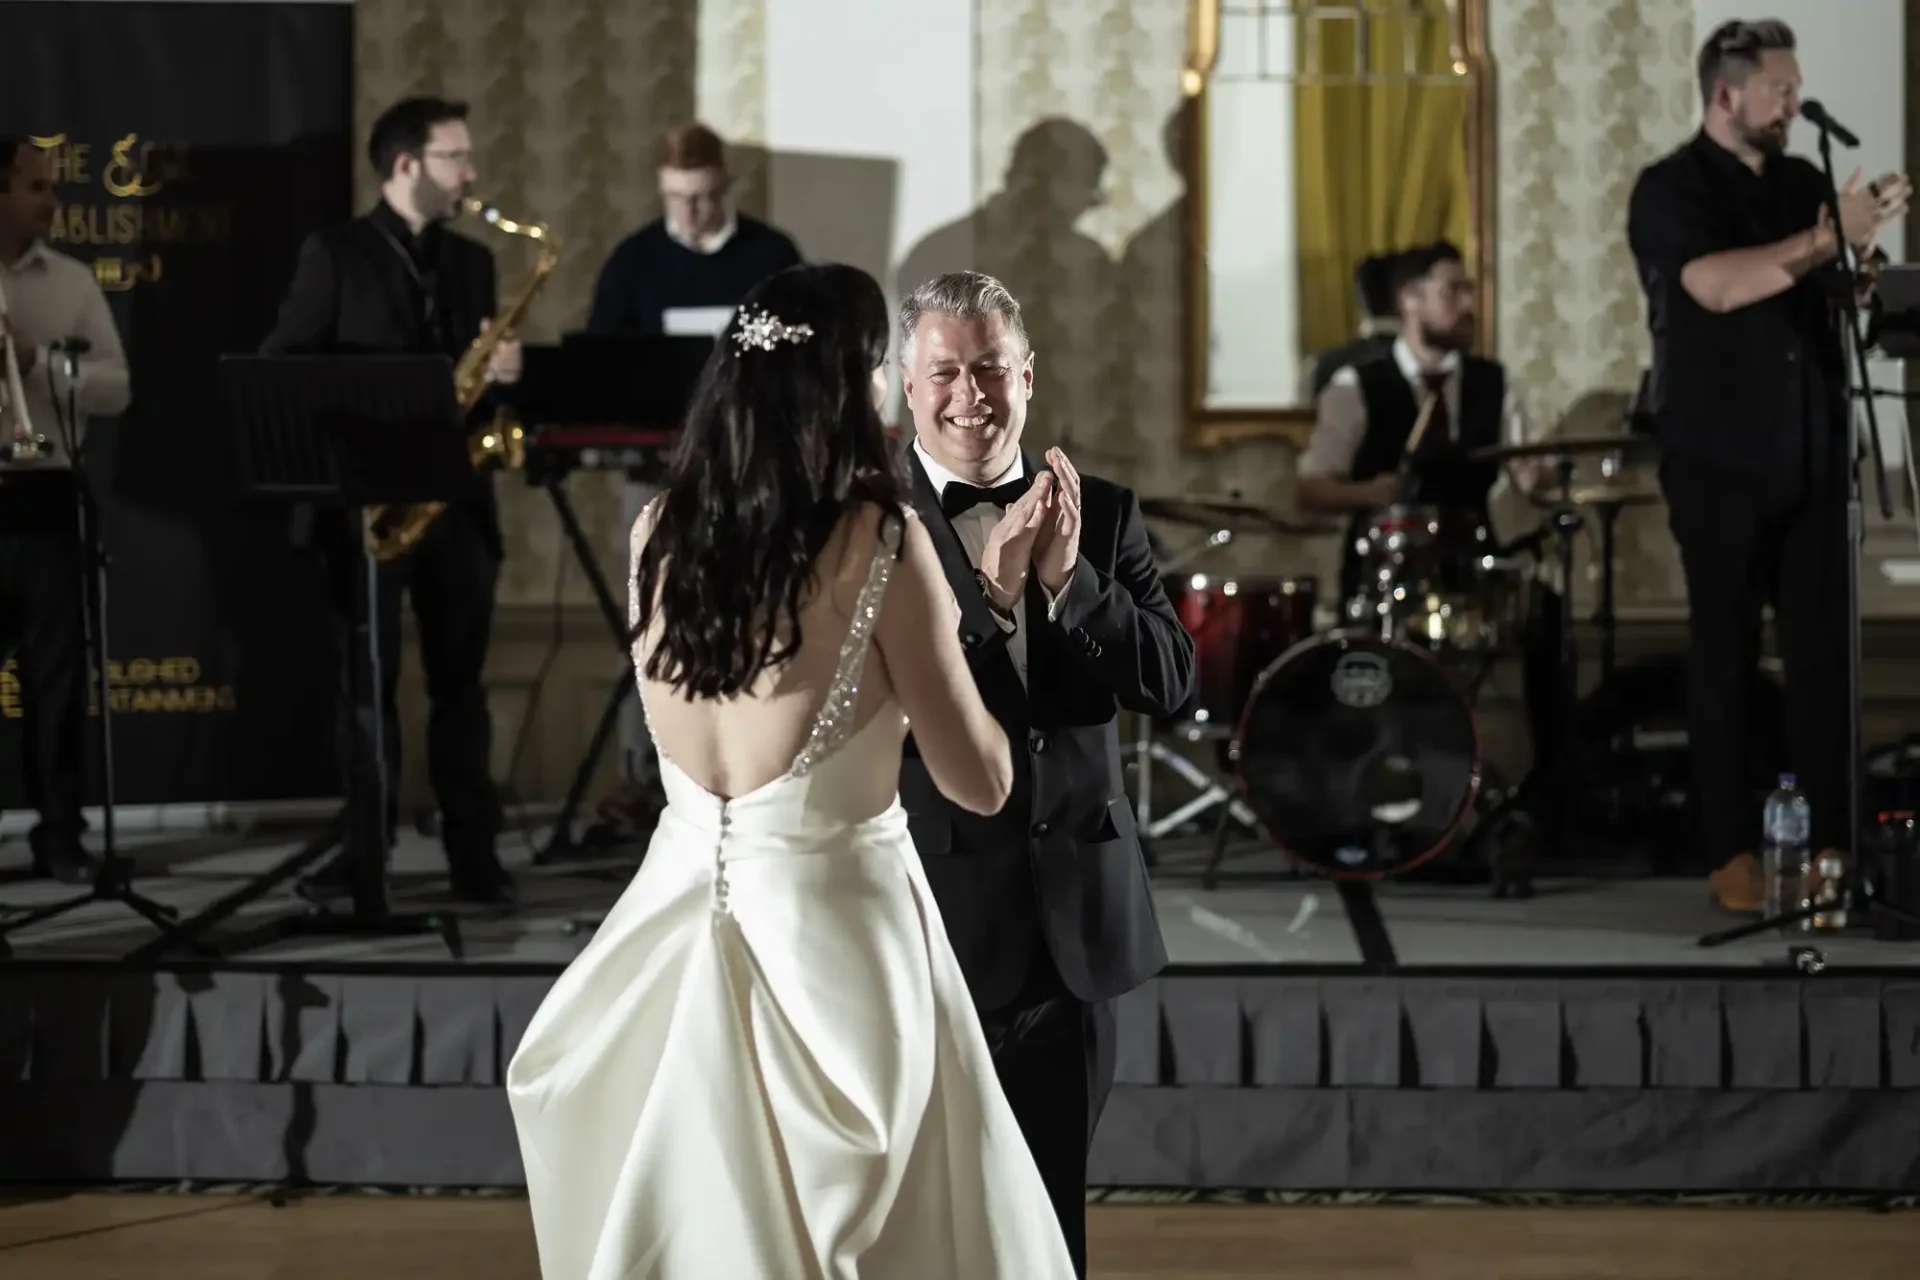 A bride and groom share a dance, smiling joyfully, with a live band performing in the background in an elegant ballroom.